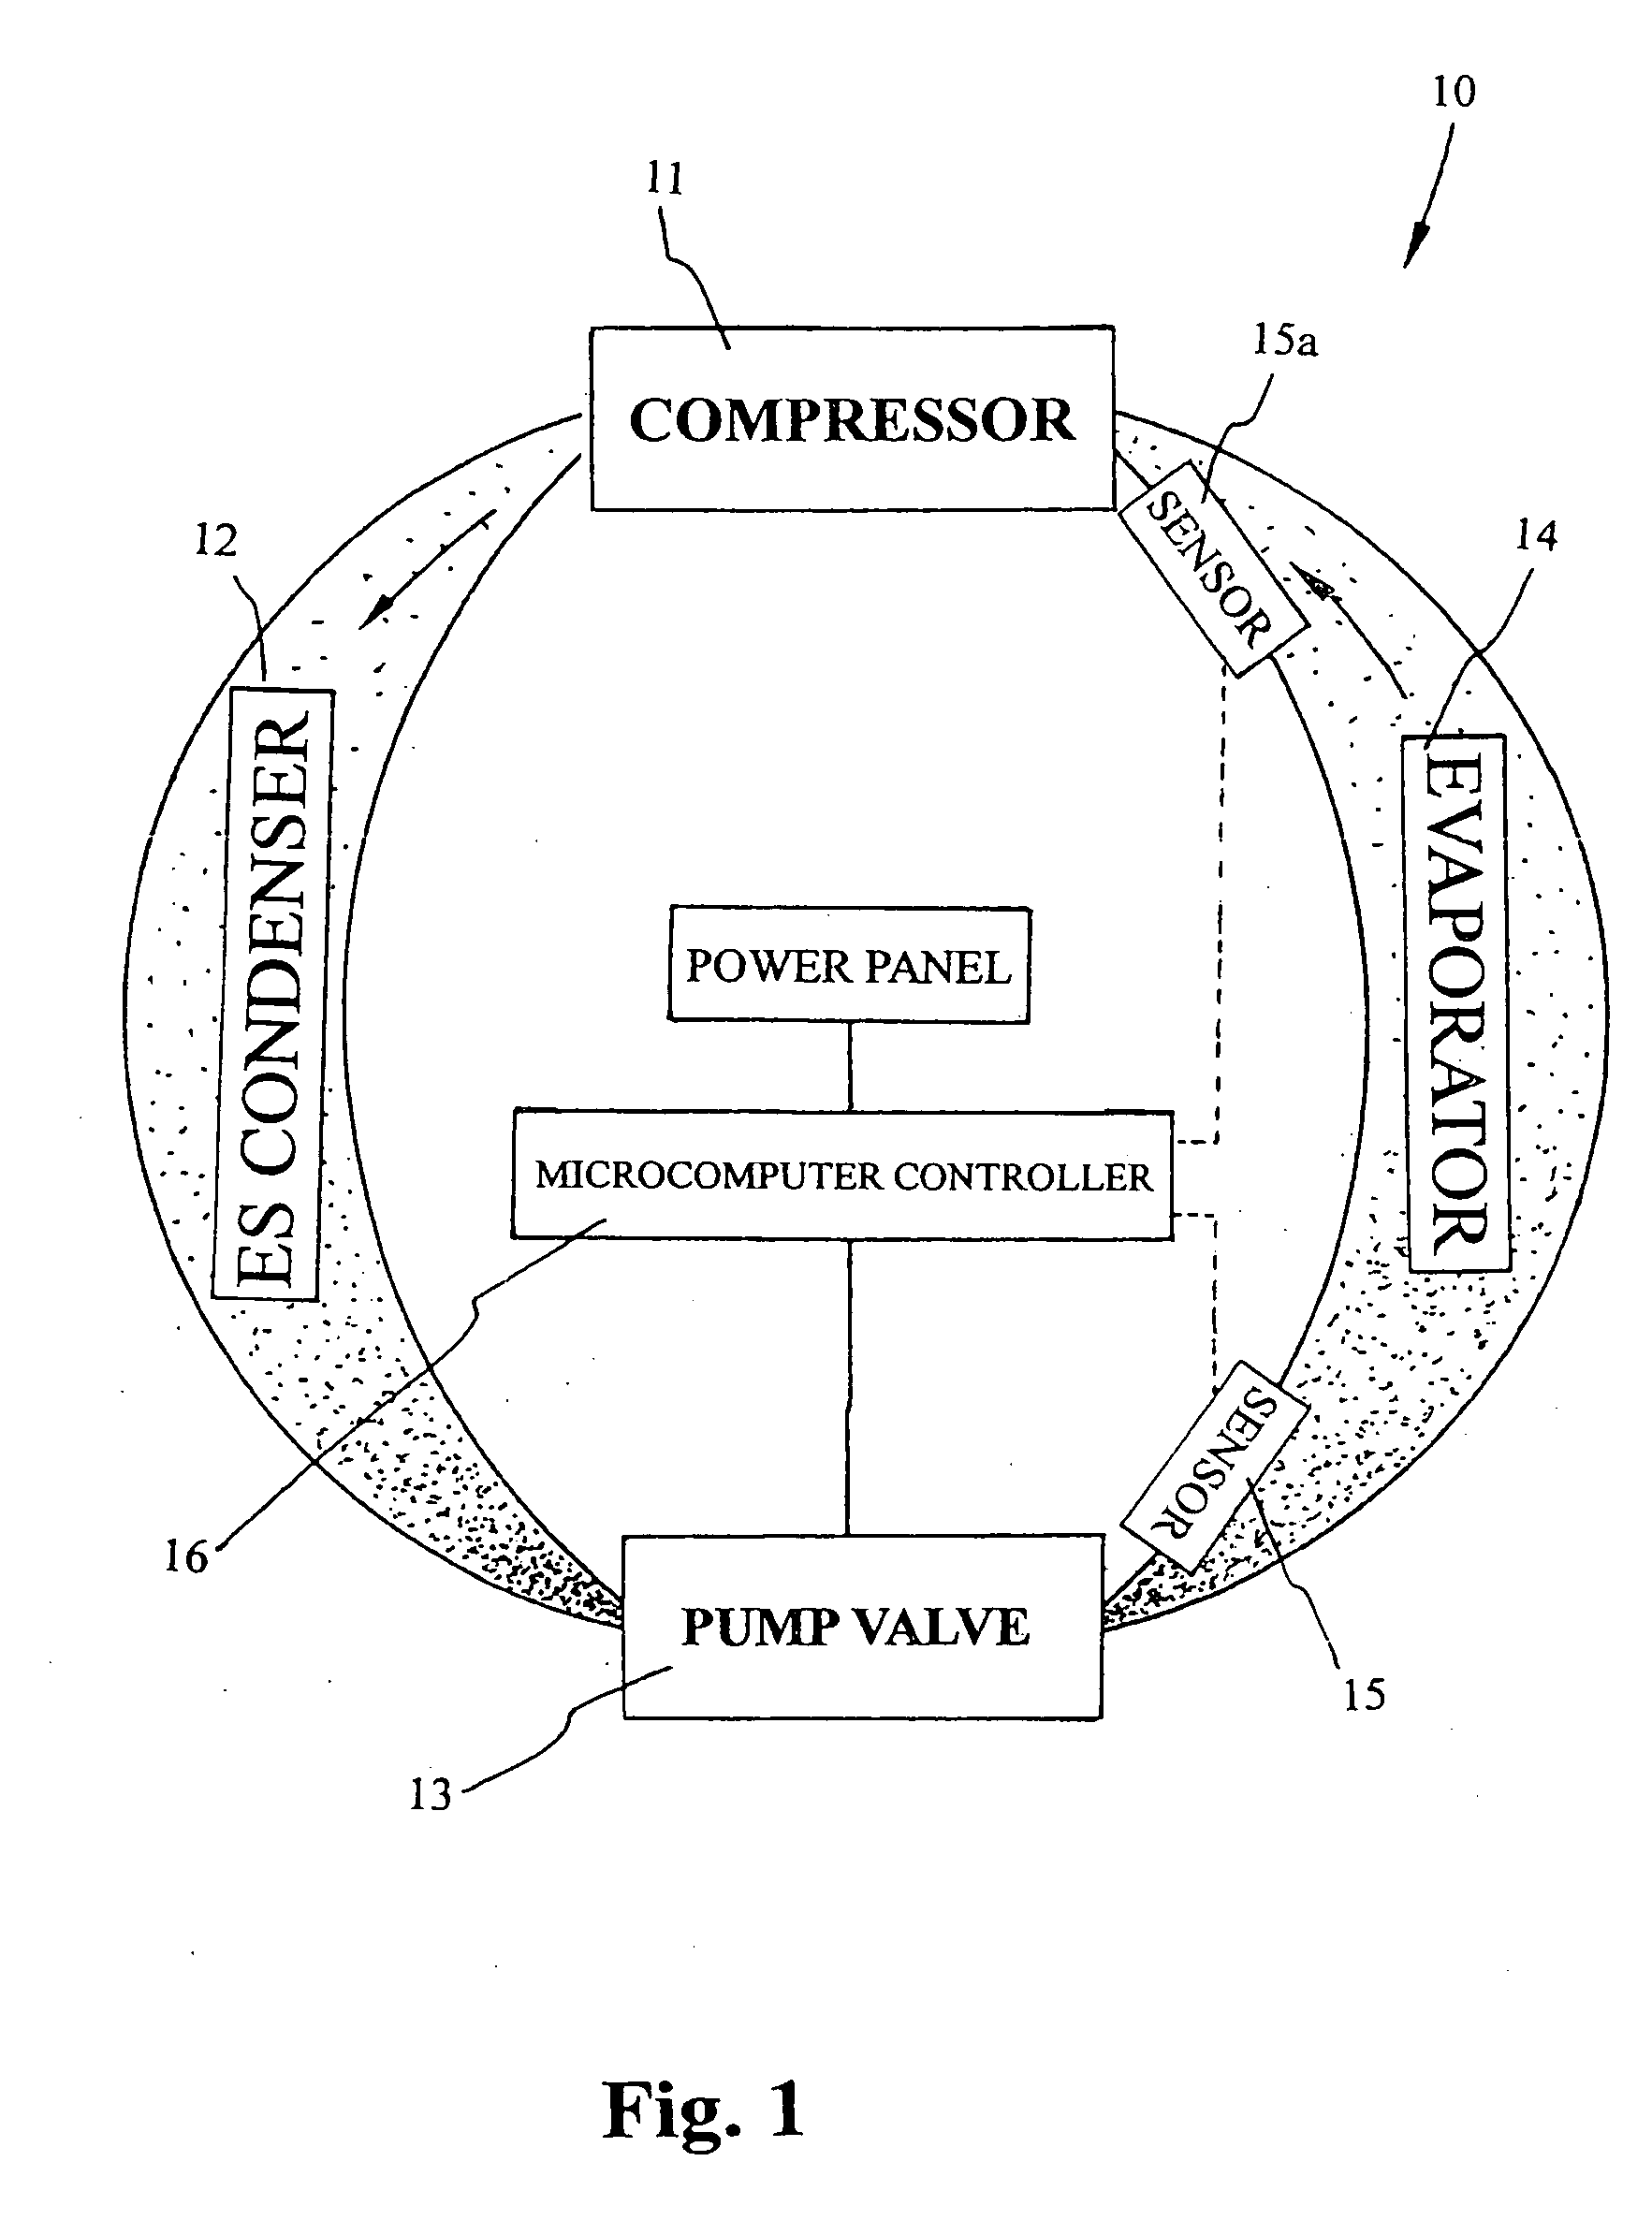 Condenser and metering device in refrigeration system for saving energy